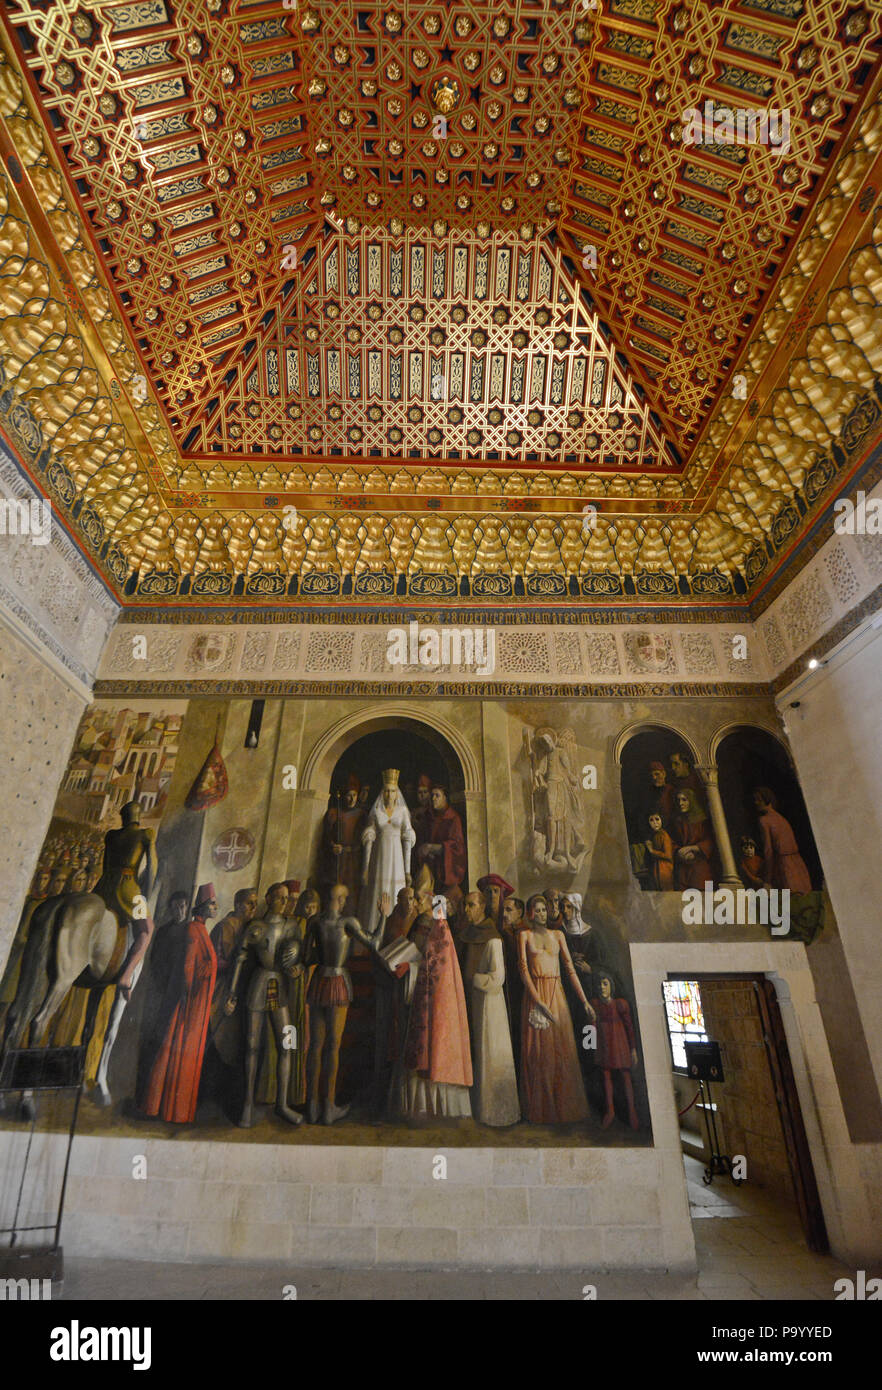 Alcazar of Segovia, Hall of the Galley with mural of the coronation of Isabella I of Castile, Spain Stock Photo